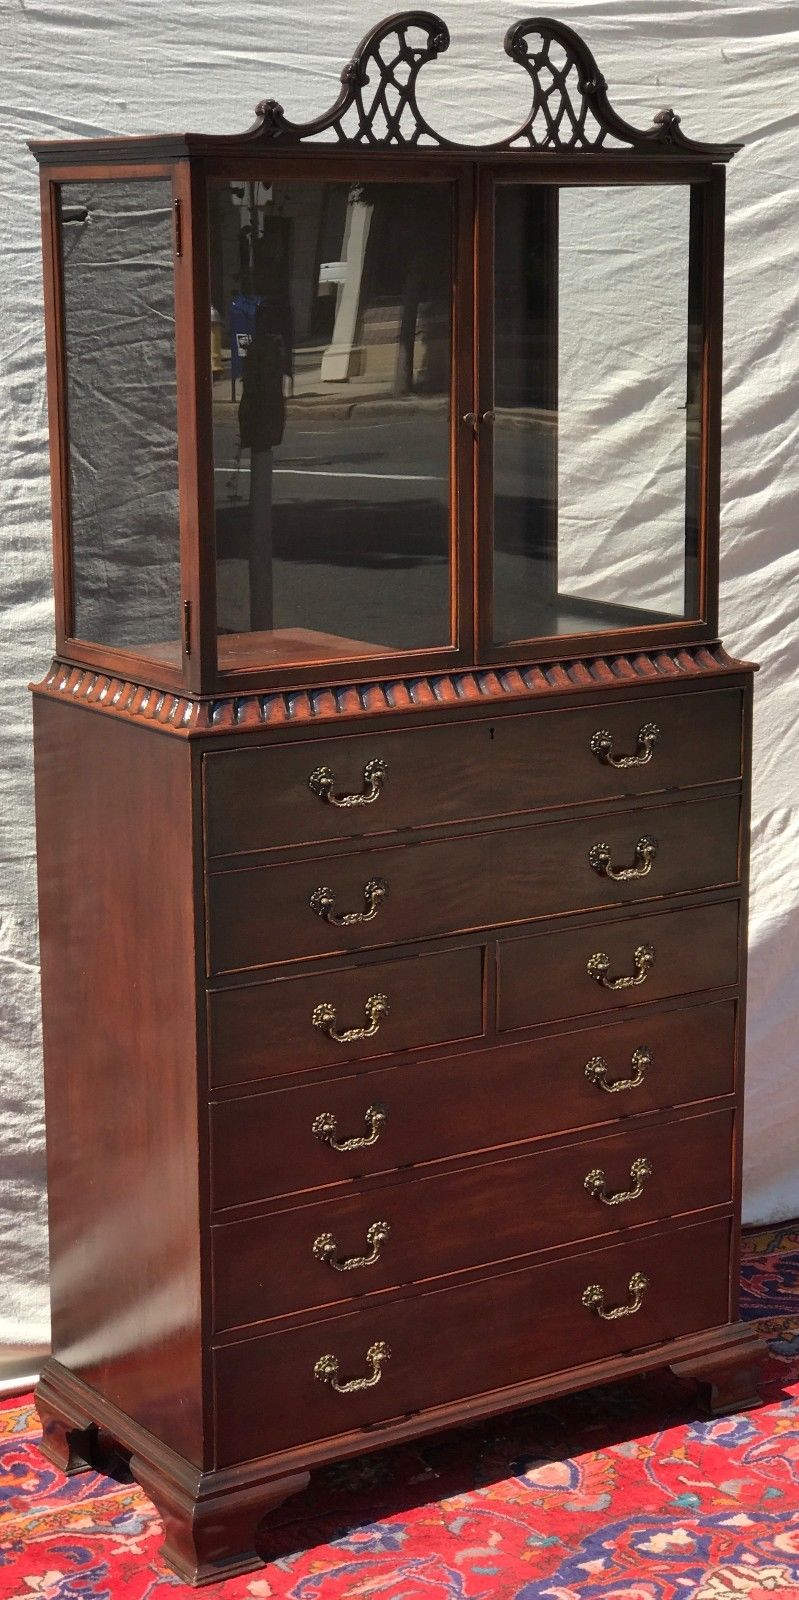 EARLY 20TH CENTURY CHINESE CHIPPENDALE MAHOGANY BUTLER'S DESK VITRINE BOOKCASE